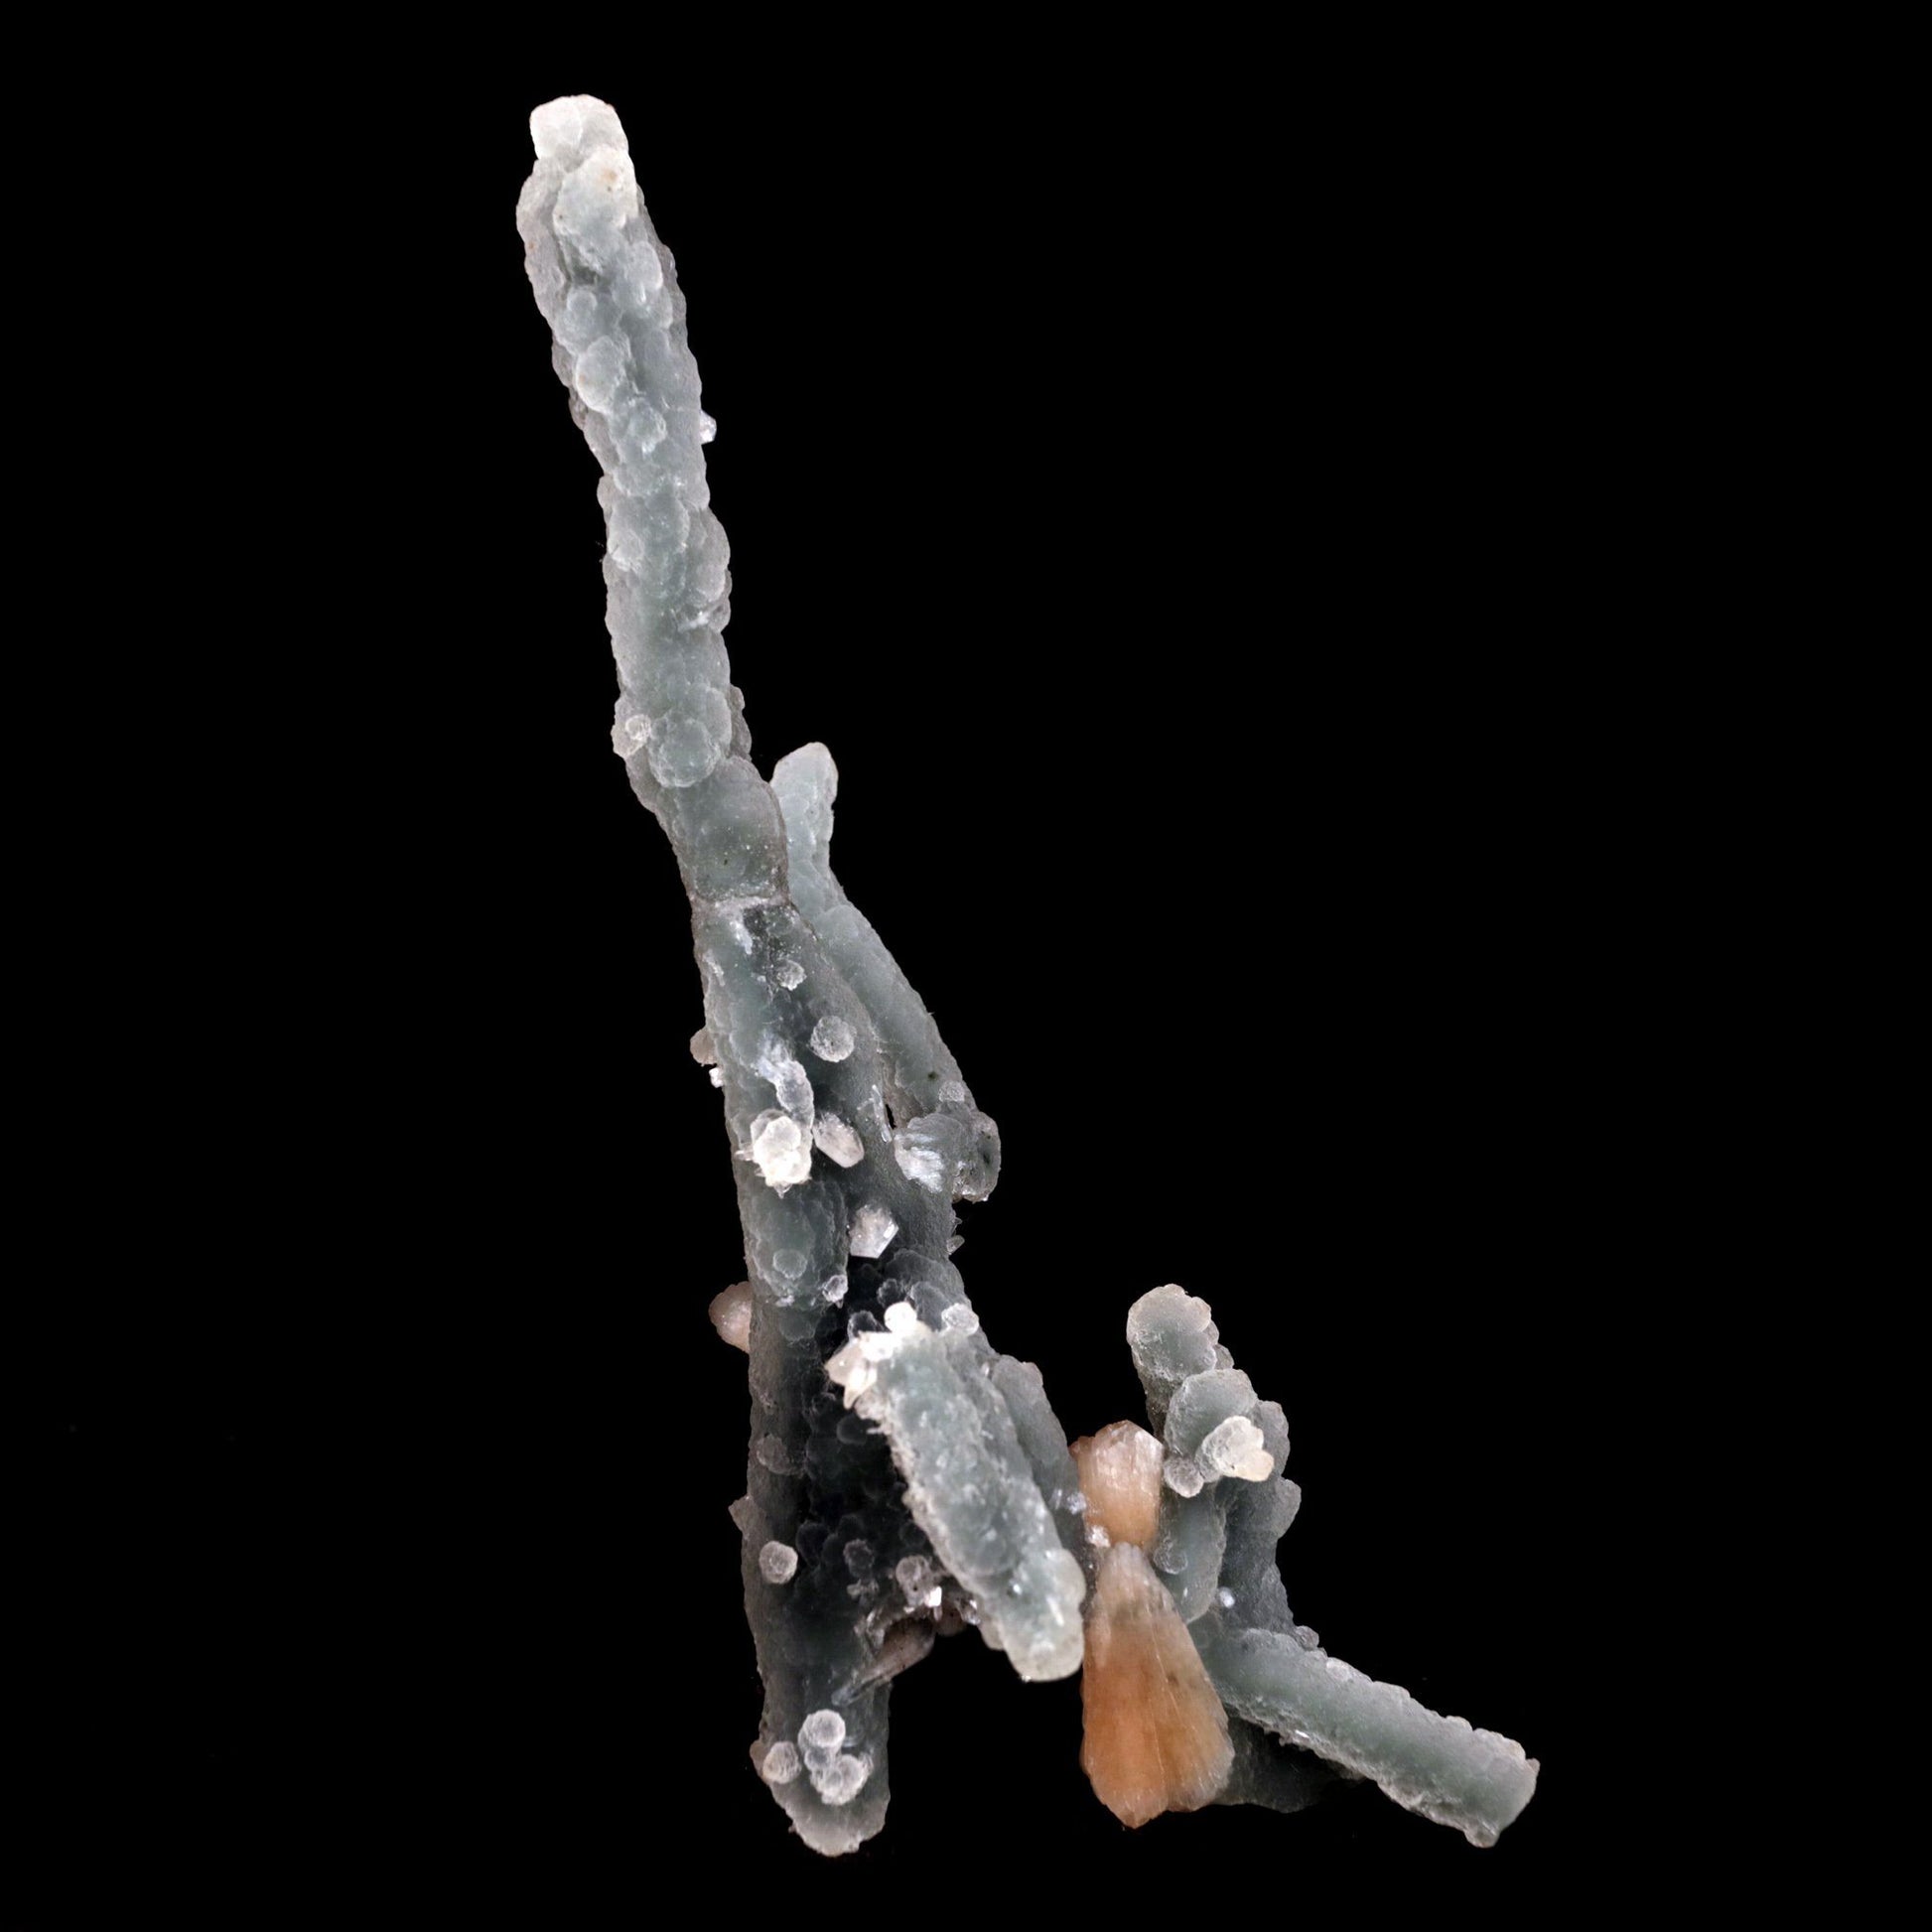 Stilbite Crystals on Chalcedony Stalactite (Repair) Natural Mineral Sp…  https://www.superbminerals.us/products/stilbite-crystals-on-chalcedony-stalactite-repair-natural-mineral-specimen-b-4824  Features: Unusual Stilbite from India, exhibiting a transparent, beige crystal with a pearly sheen sitting atop an off-white stalactitic Chalcedony cluster in an aesthetically pleasing display. A one-of-a-kind item in superb condition. Primary Mineral(s): StilbiteSecondary Mineral(s): N/AMatrix: Chalcedony